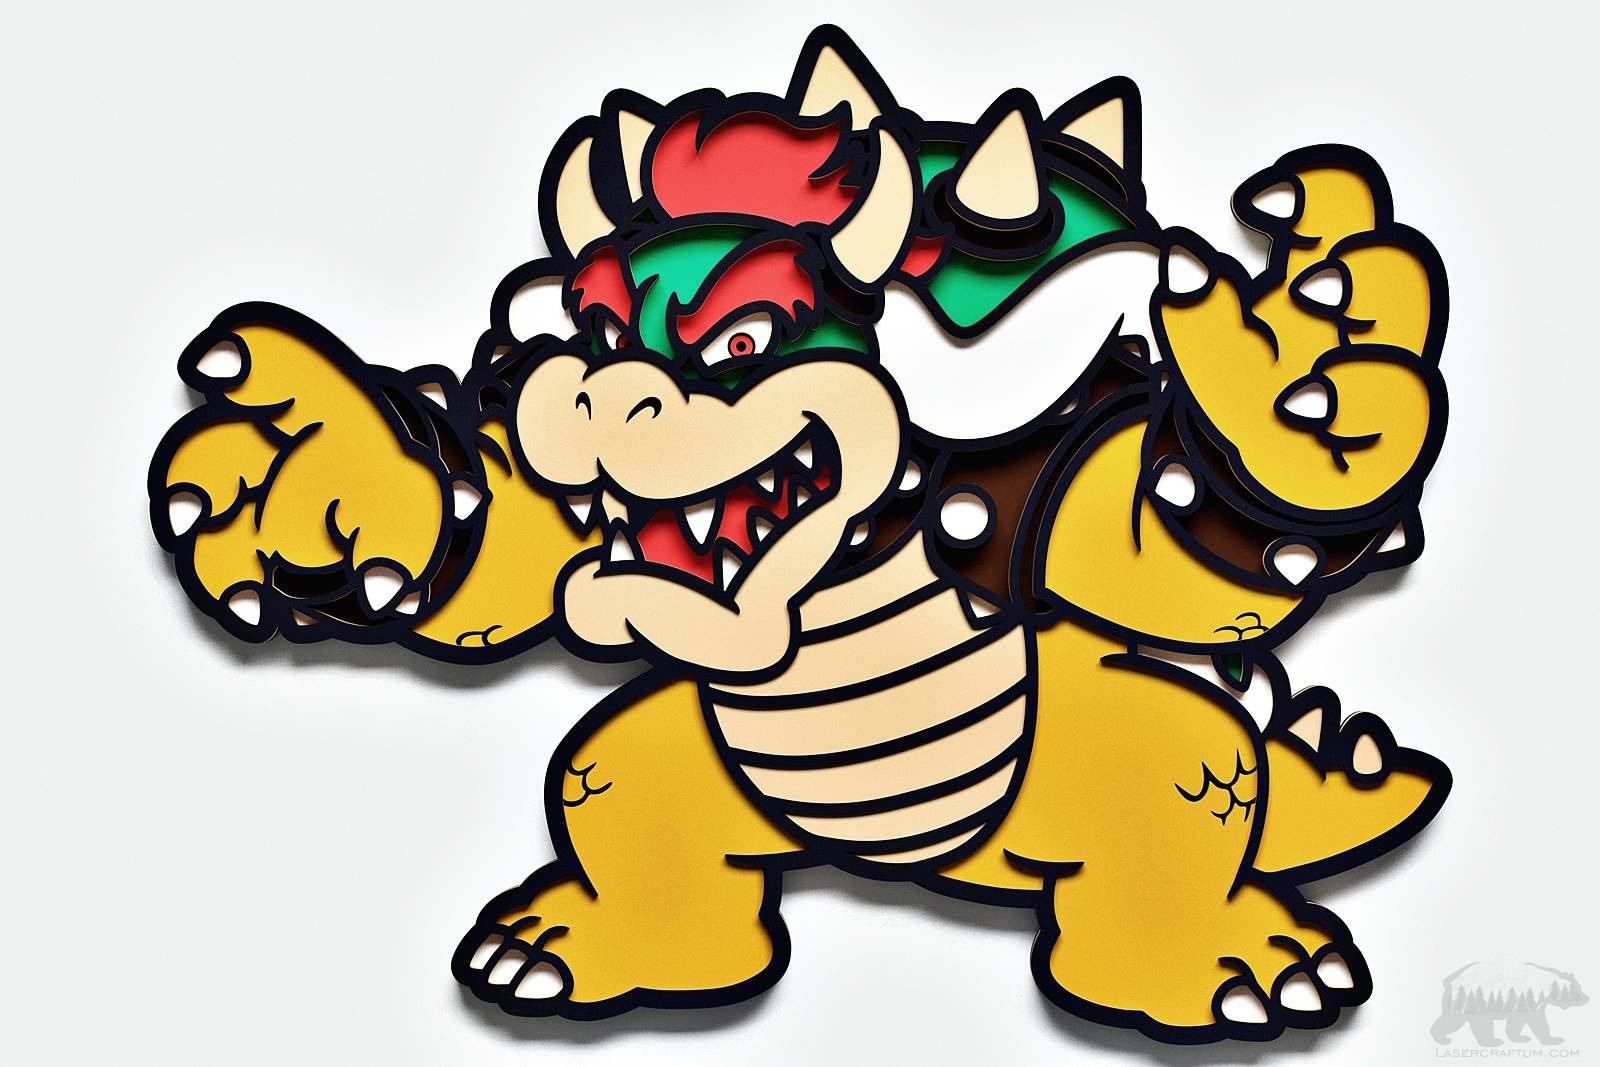 Bowser Layered Design for cutting